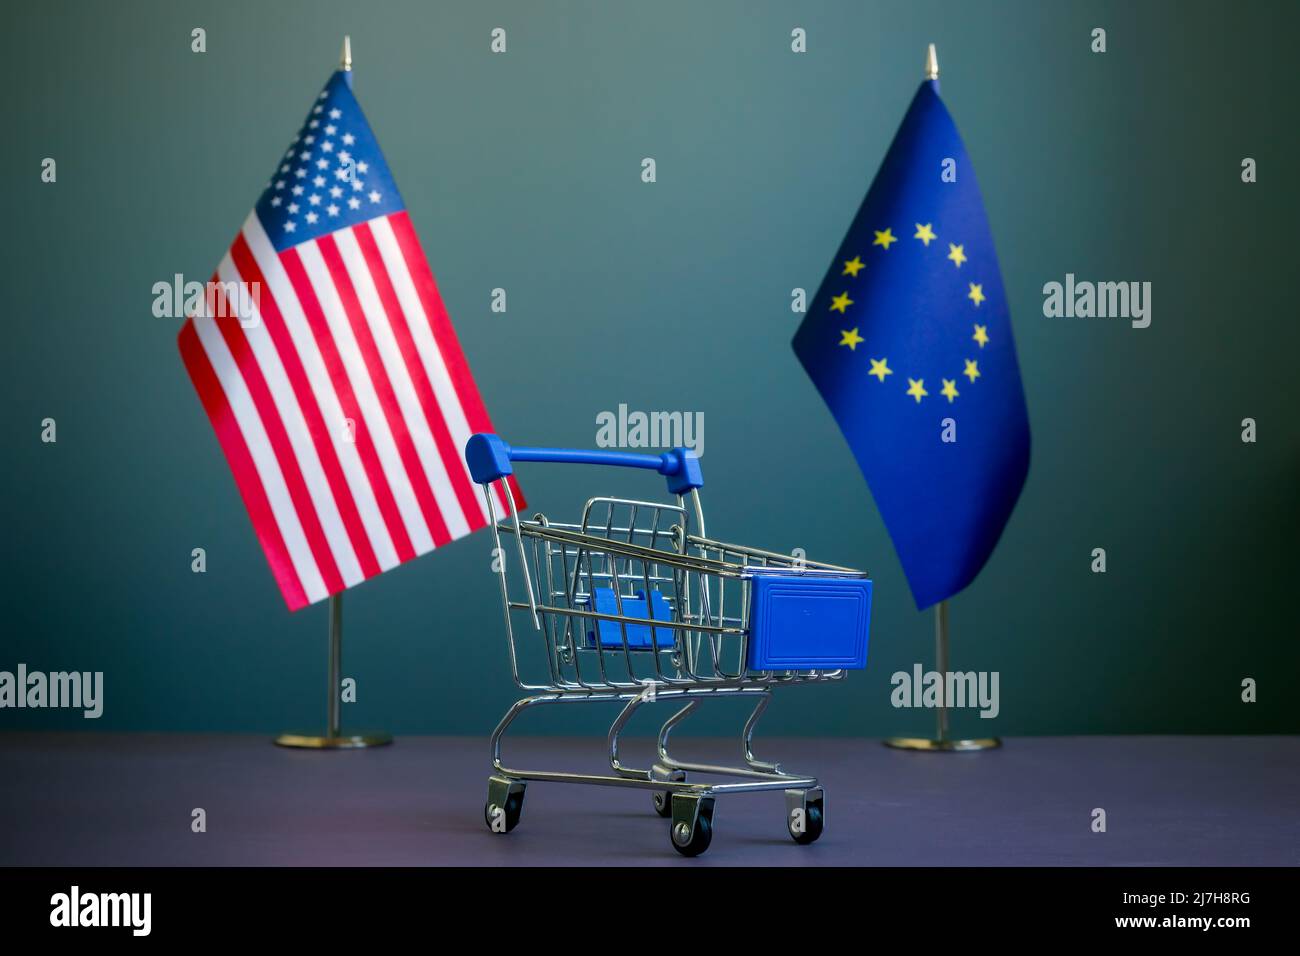 USA and EU flags and a shopping cart as a symbol of trade relations. Stock Photo